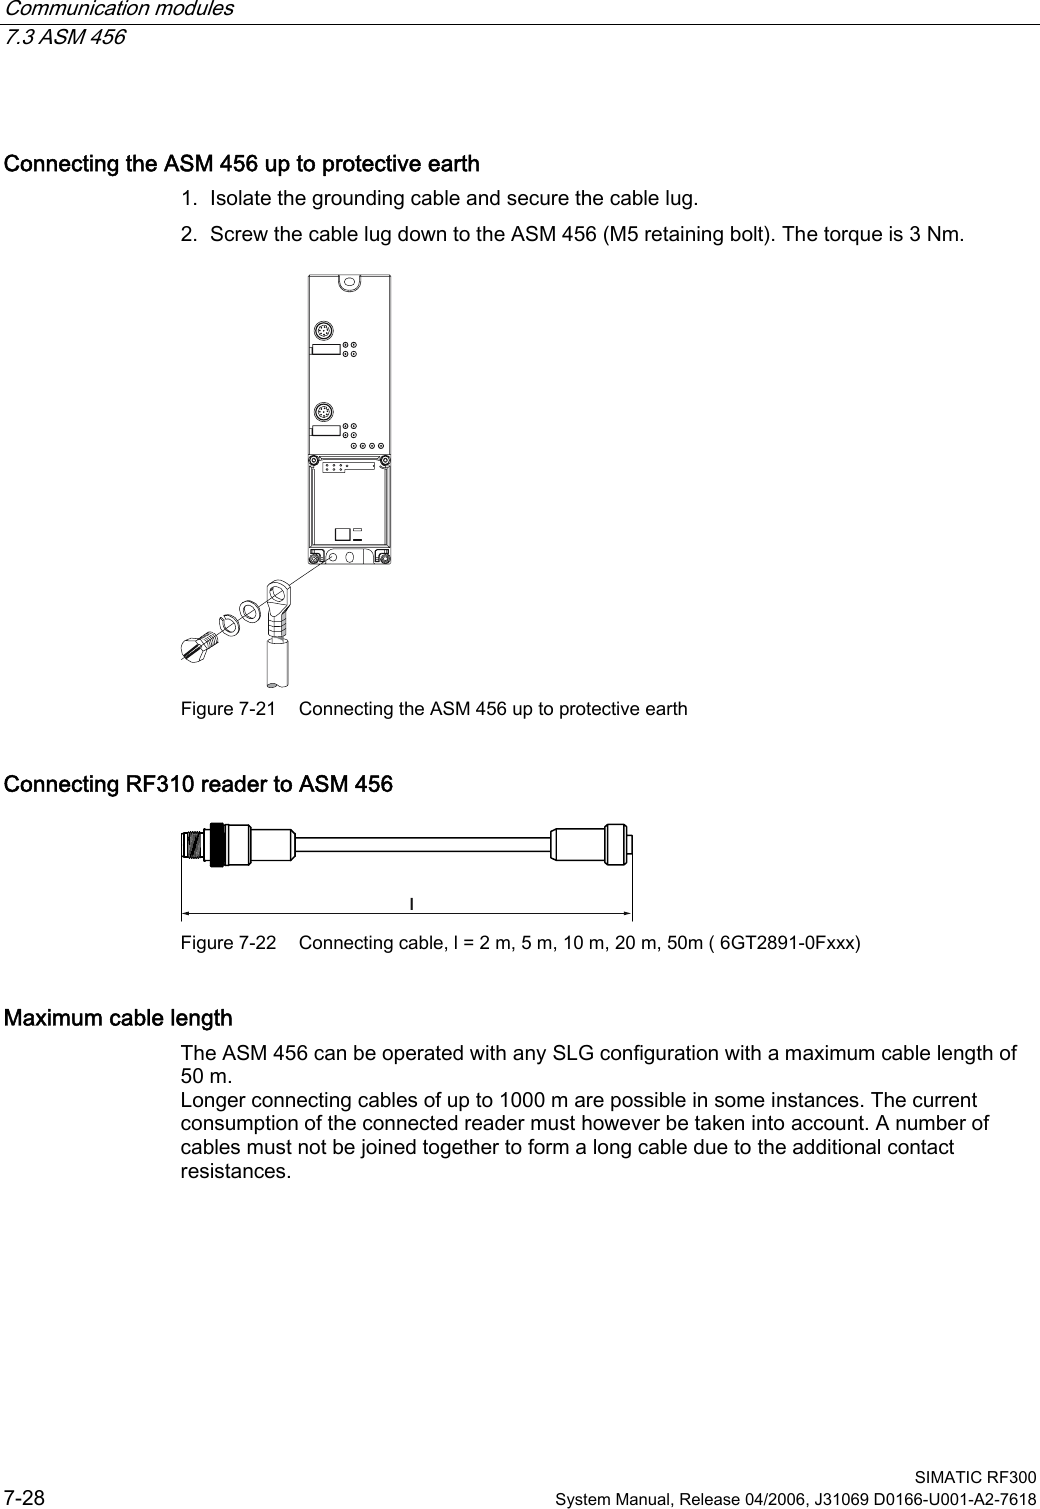 Communication modules 7.3 ASM 456  SIMATIC RF300 7-28  System Manual, Release 04/2006, J31069 D0166-U001-A2-7618 Connecting the ASM 456 up to protective earth 1. Isolate the grounding cable and secure the cable lug. 2. Screw the cable lug down to the ASM 456 (M5 retaining bolt). The torque is 3 Nm.  Figure 7-21  Connecting the ASM 456 up to protective earth Connecting RF310 reader to ASM 456 O Figure 7-22  Connecting cable, l = 2 m, 5 m, 10 m, 20 m, 50m ( 6GT2891-0Fxxx)  Maximum cable length The ASM 456 can be operated with any SLG configuration with a maximum cable length of 50 m. Longer connecting cables of up to 1000 m are possible in some instances. The current consumption of the connected reader must however be taken into account. A number of cables must not be joined together to form a long cable due to the additional contact resistances. 